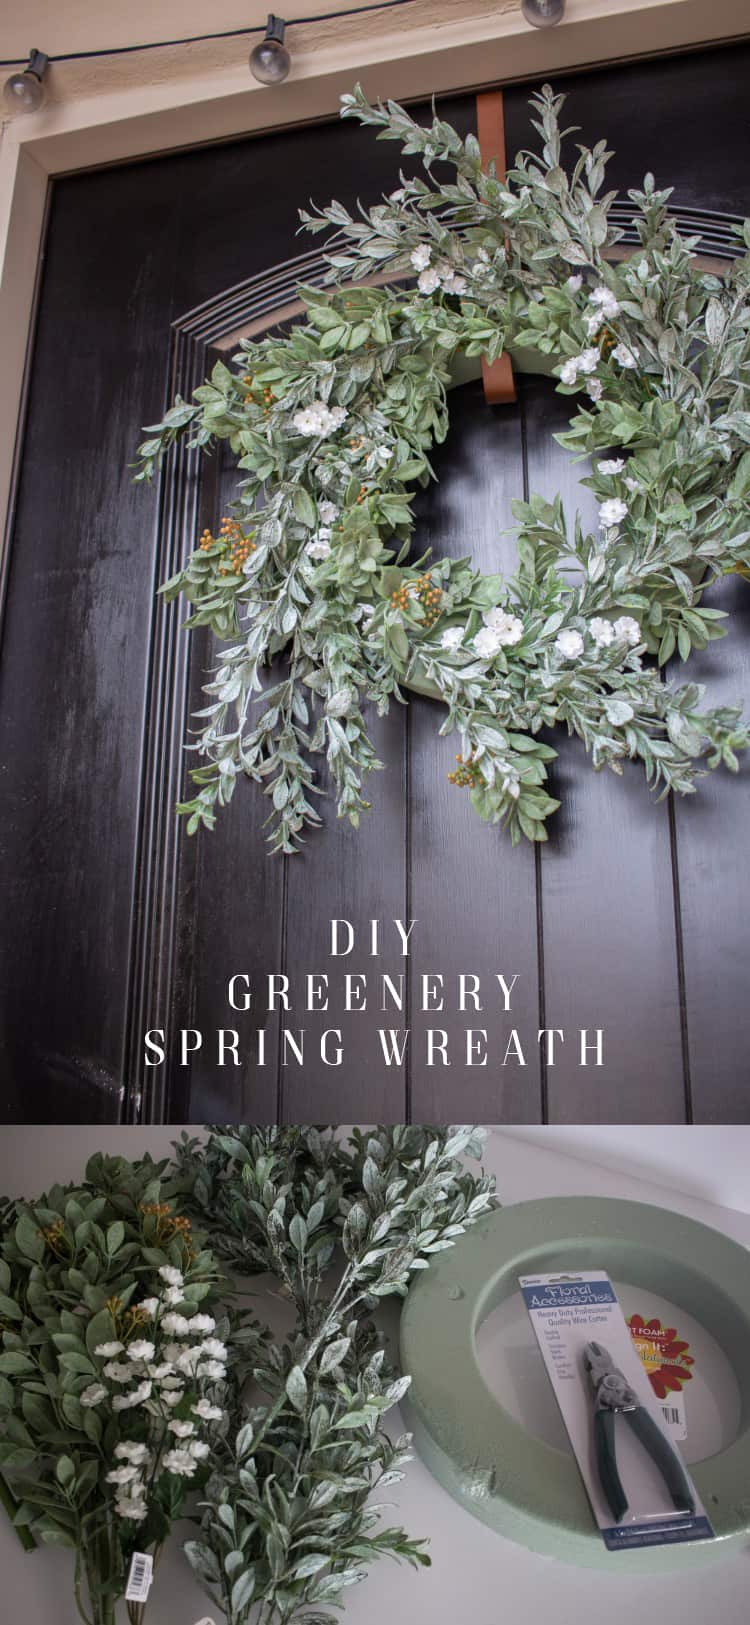 Greenery is never a bad idea, especially in spring! Whip up this wreath for your home in less than 30 minutes.